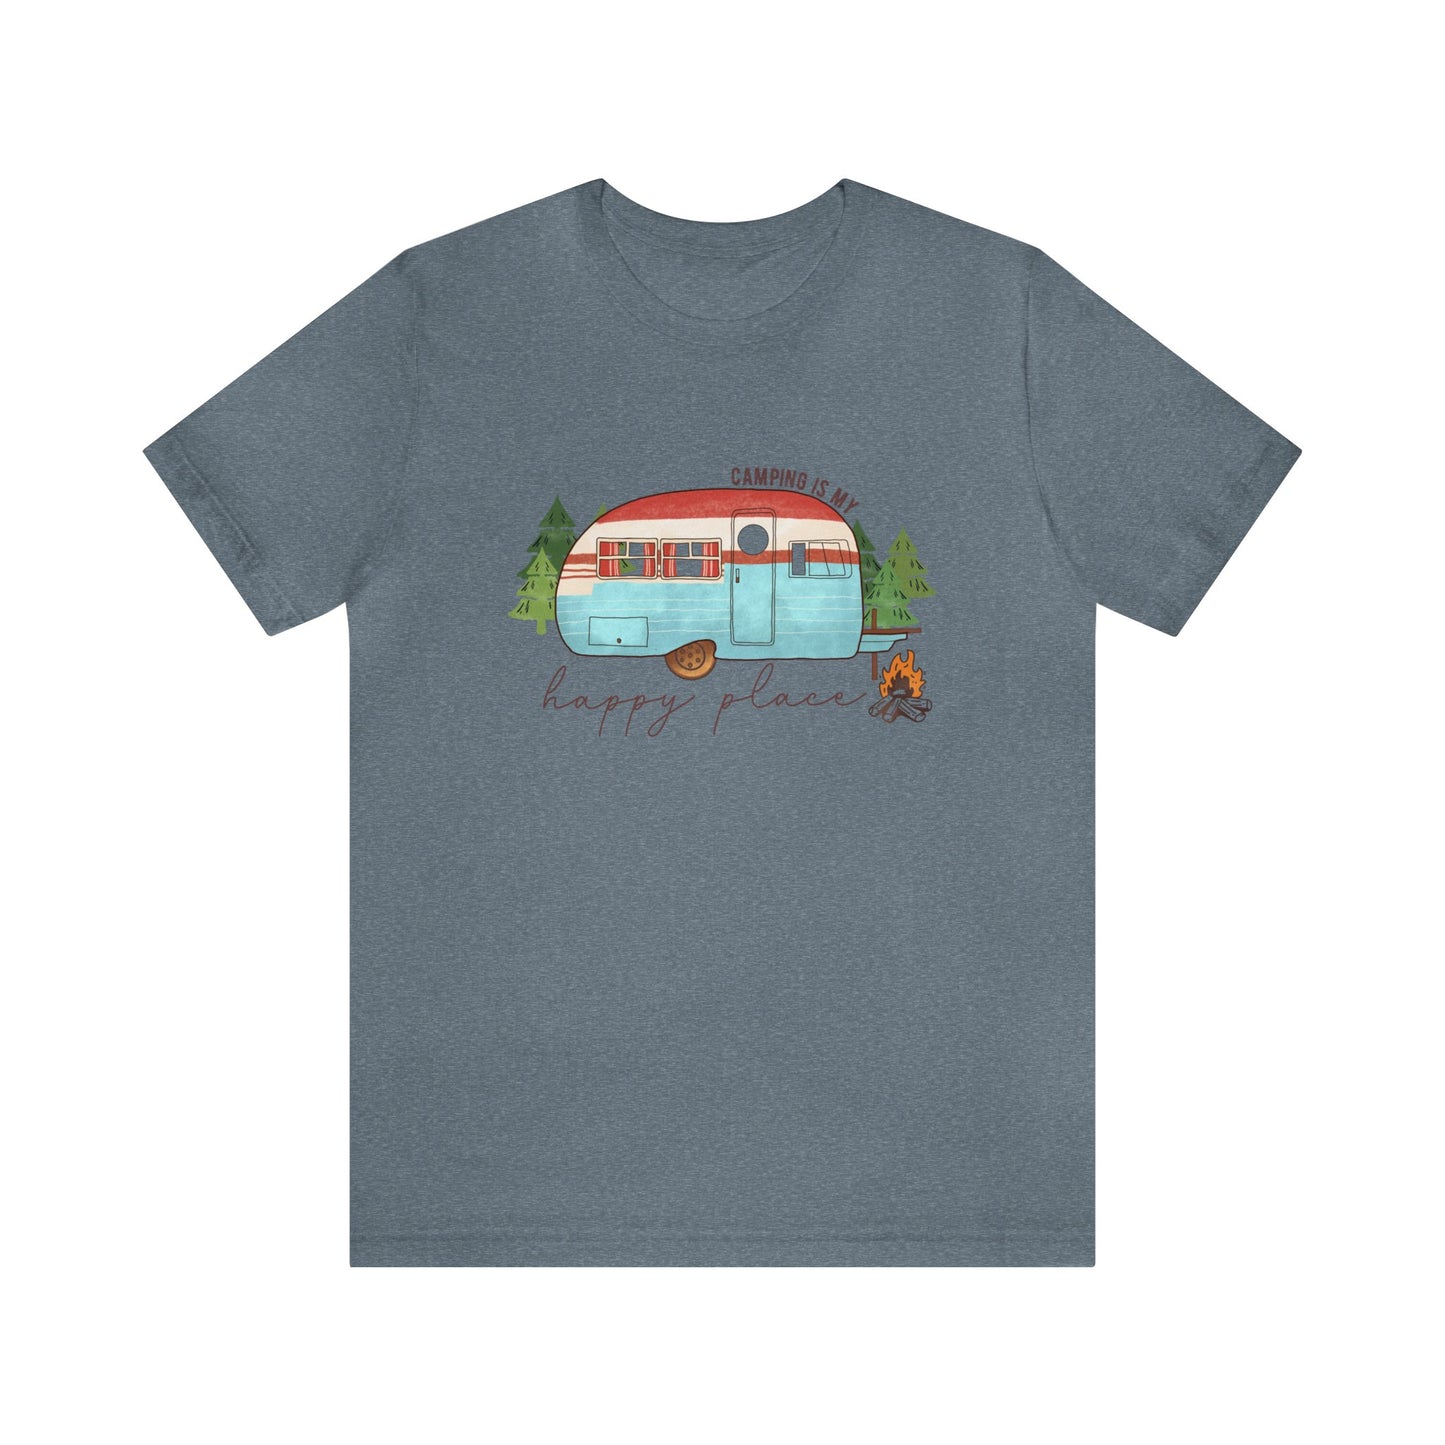 Camping is my happy place adult unisex Tshirt